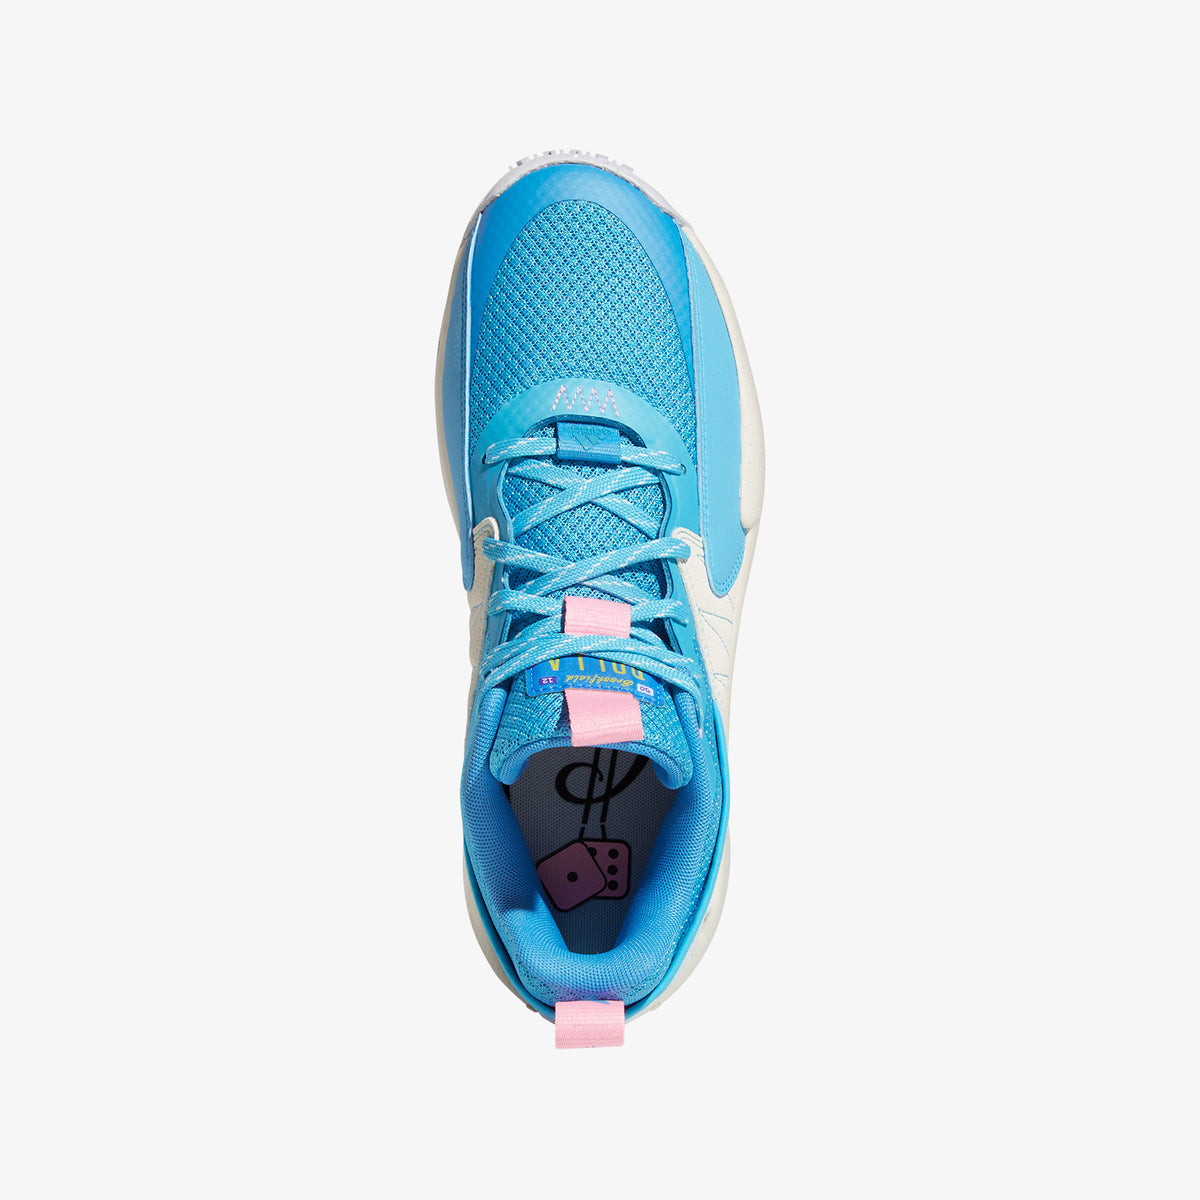 Dame Certified EXTPLY 2.0 - Turquoise